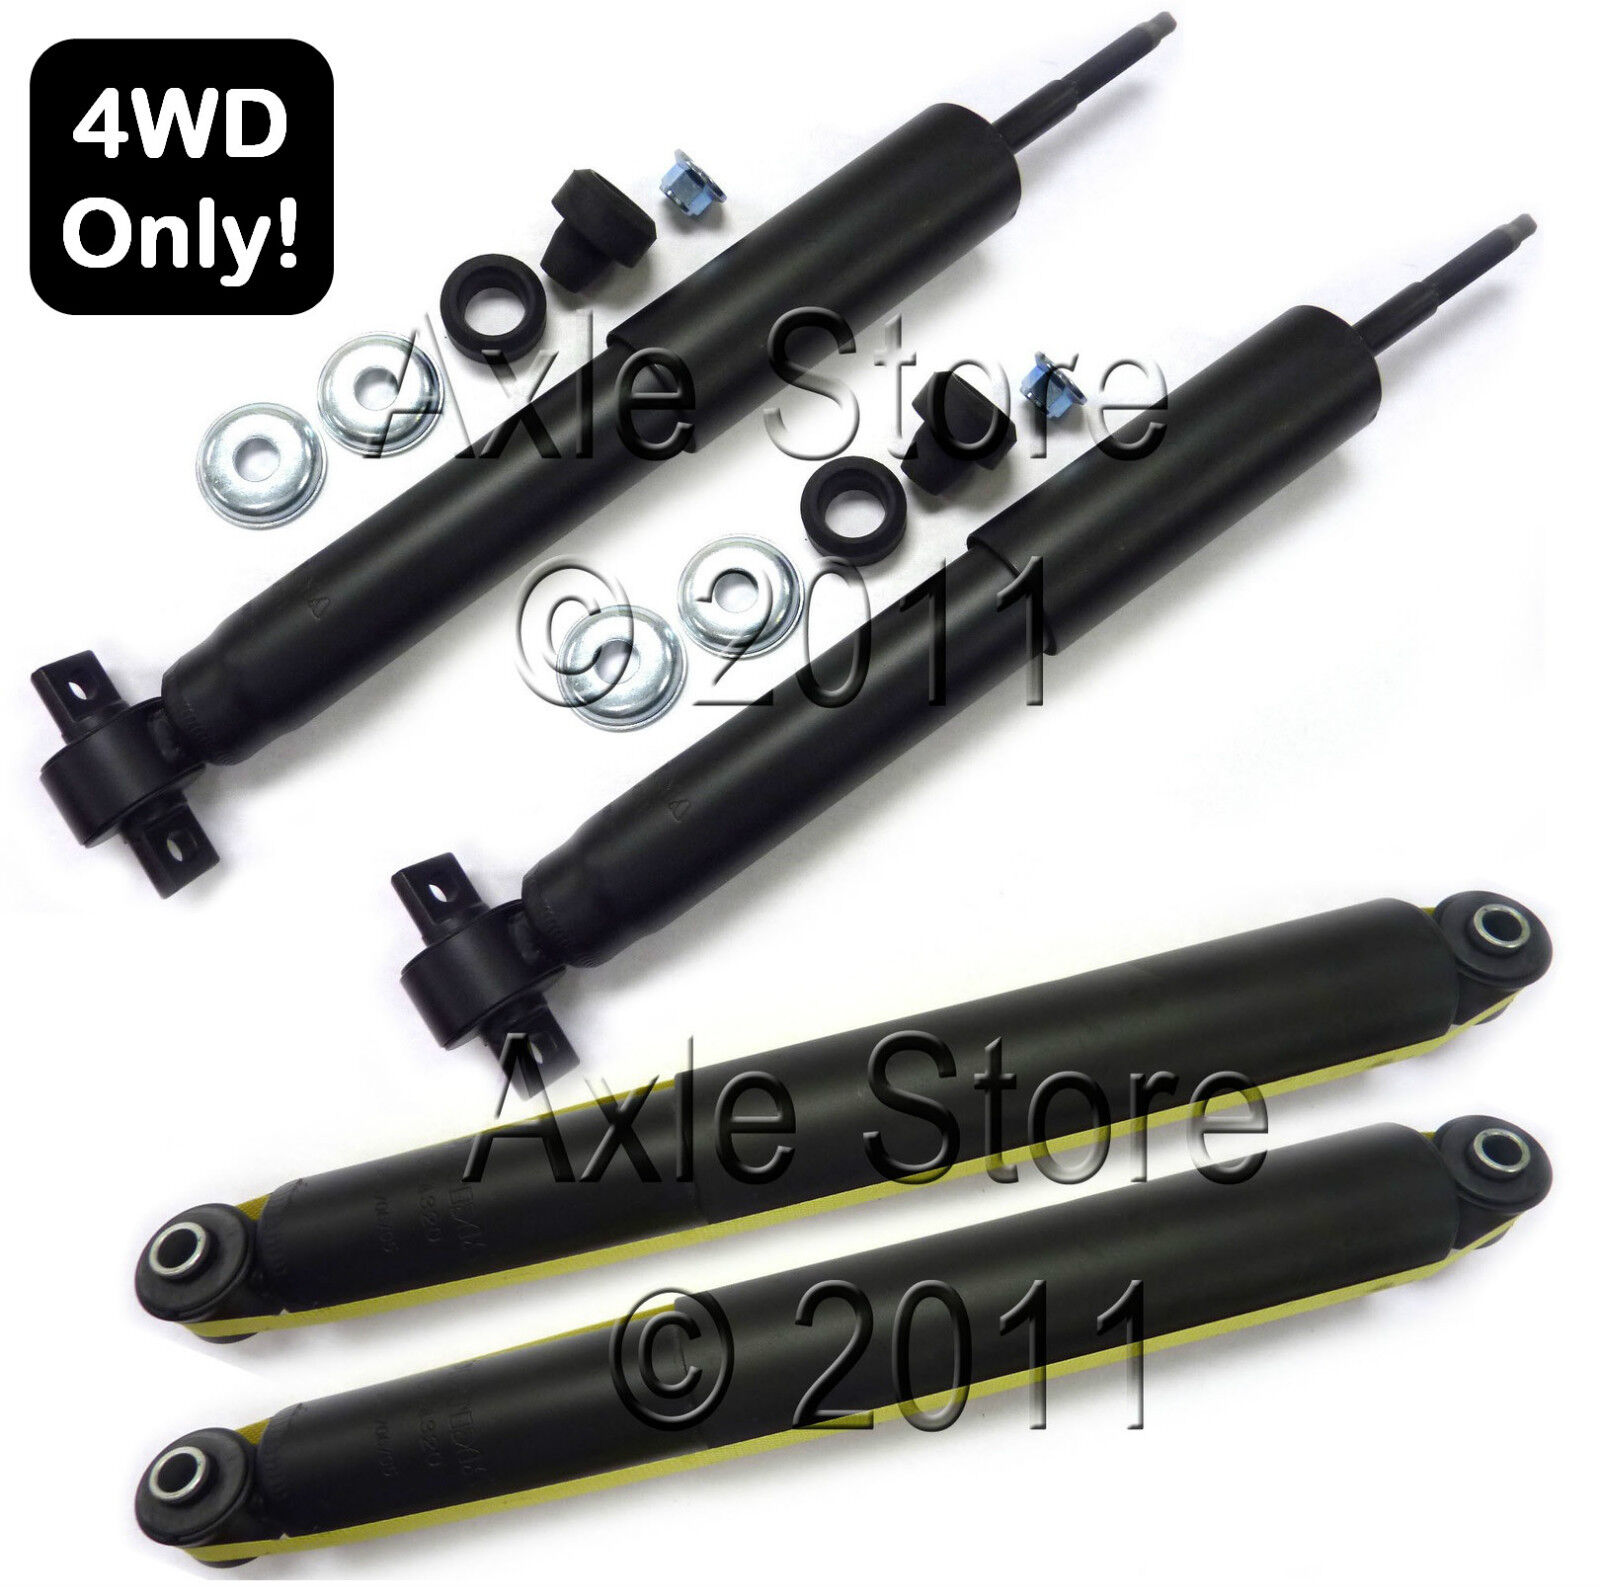 4 New Shocks with Fit 4WD Models Only 1997-02 Expedition, 1998-02 Navigator